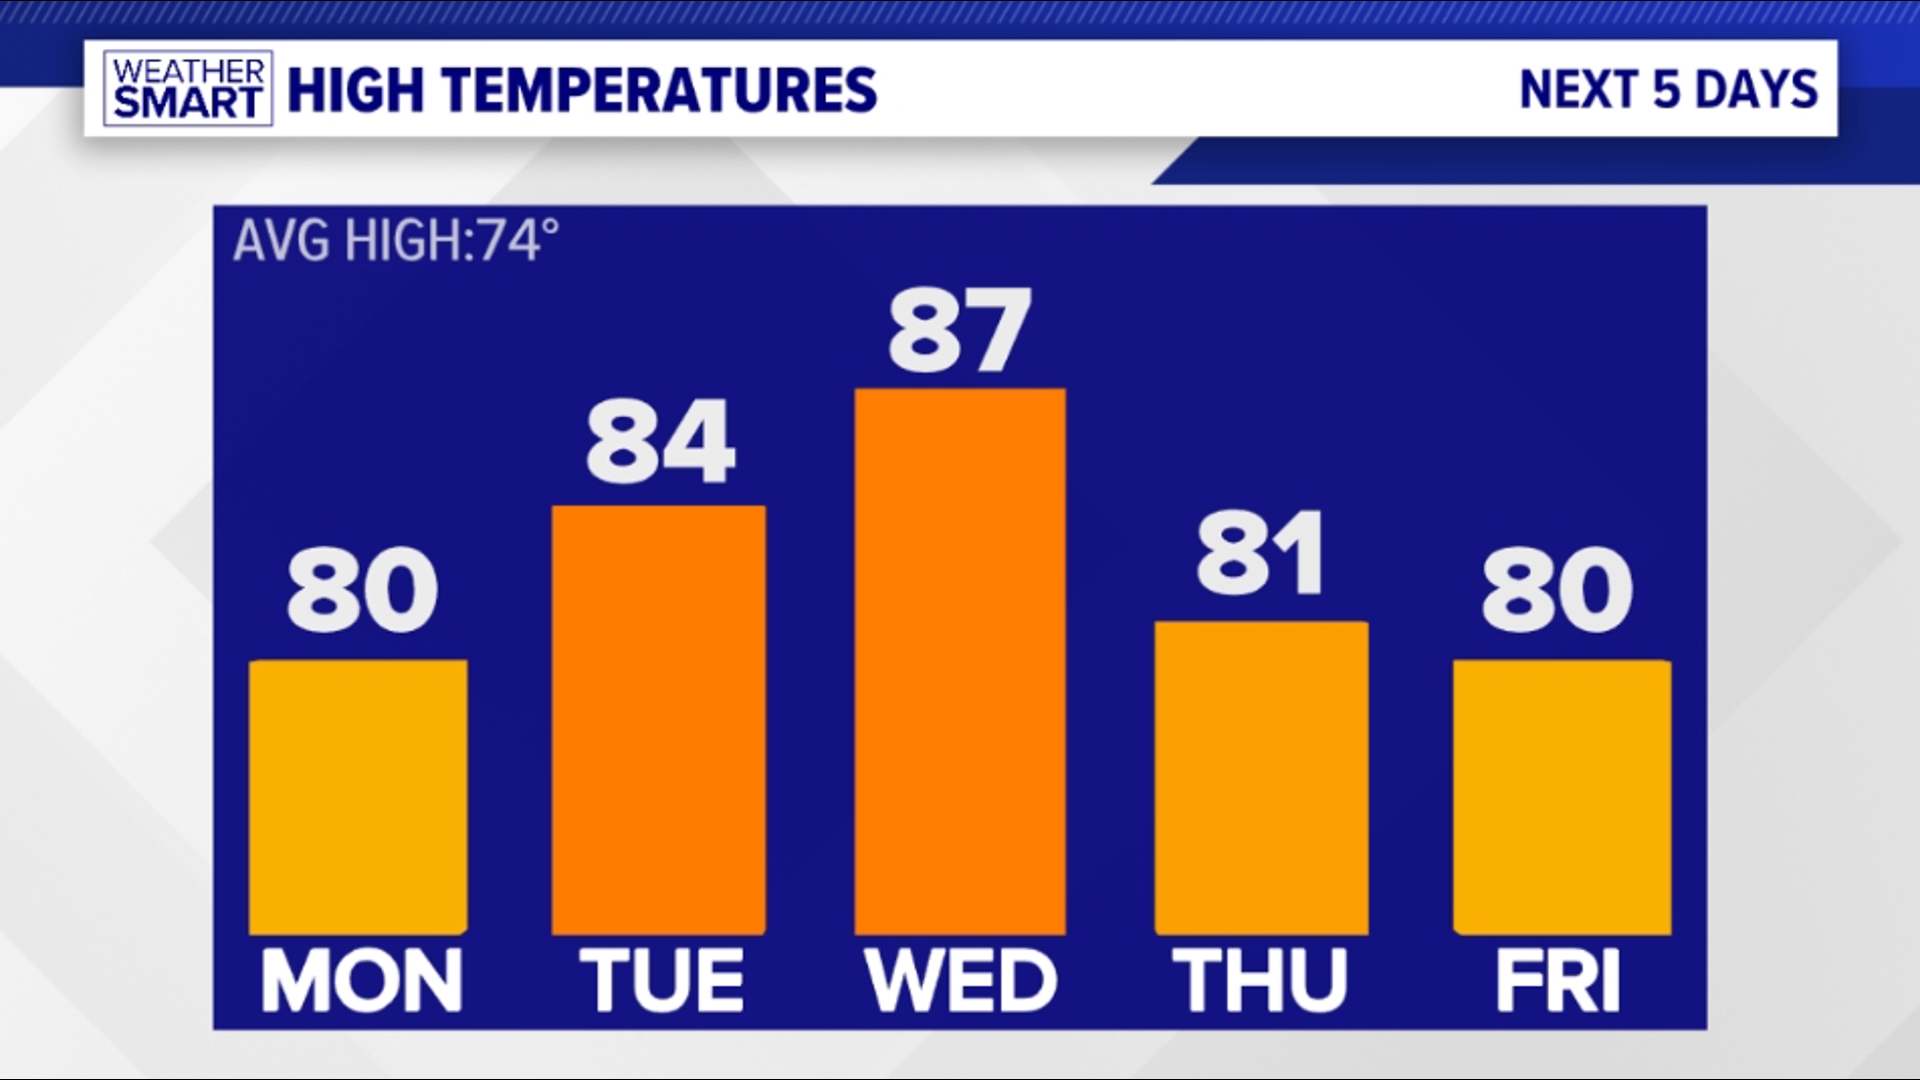 Turning drier and warmer this week with highs back in the 80s!